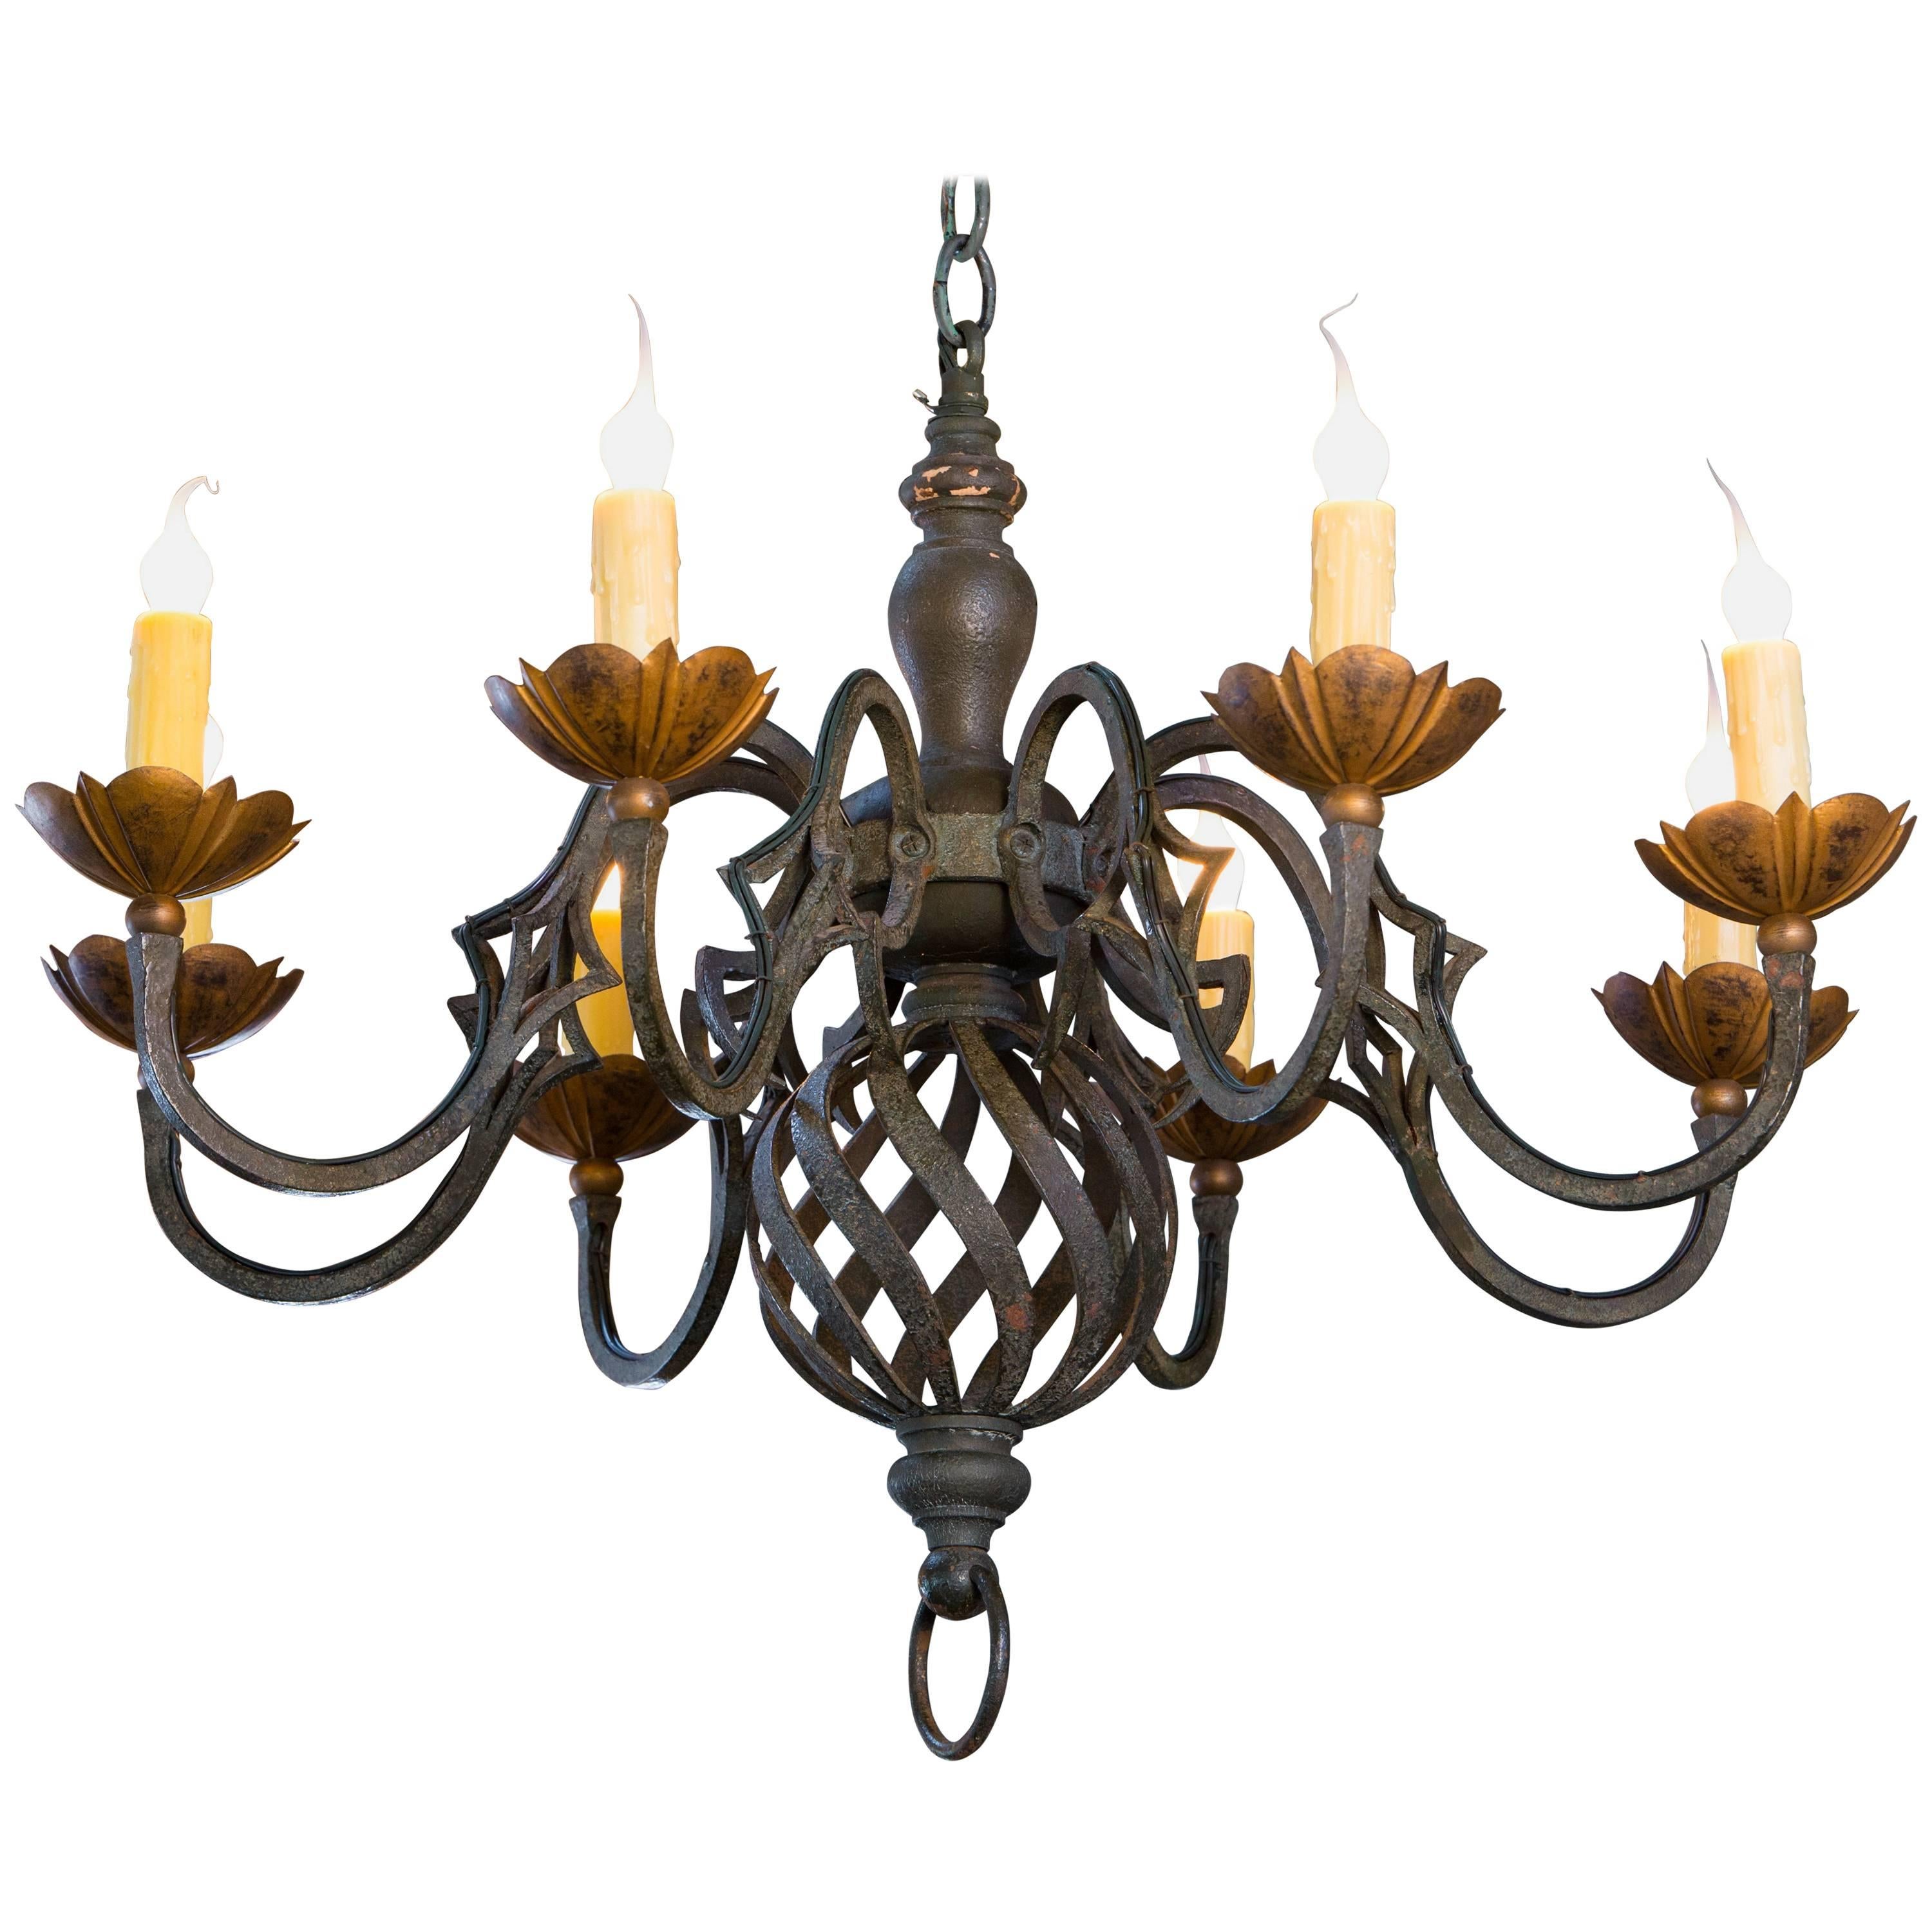 Black and Gold Iron Chandelier with Eight Arms from France, circa 1920